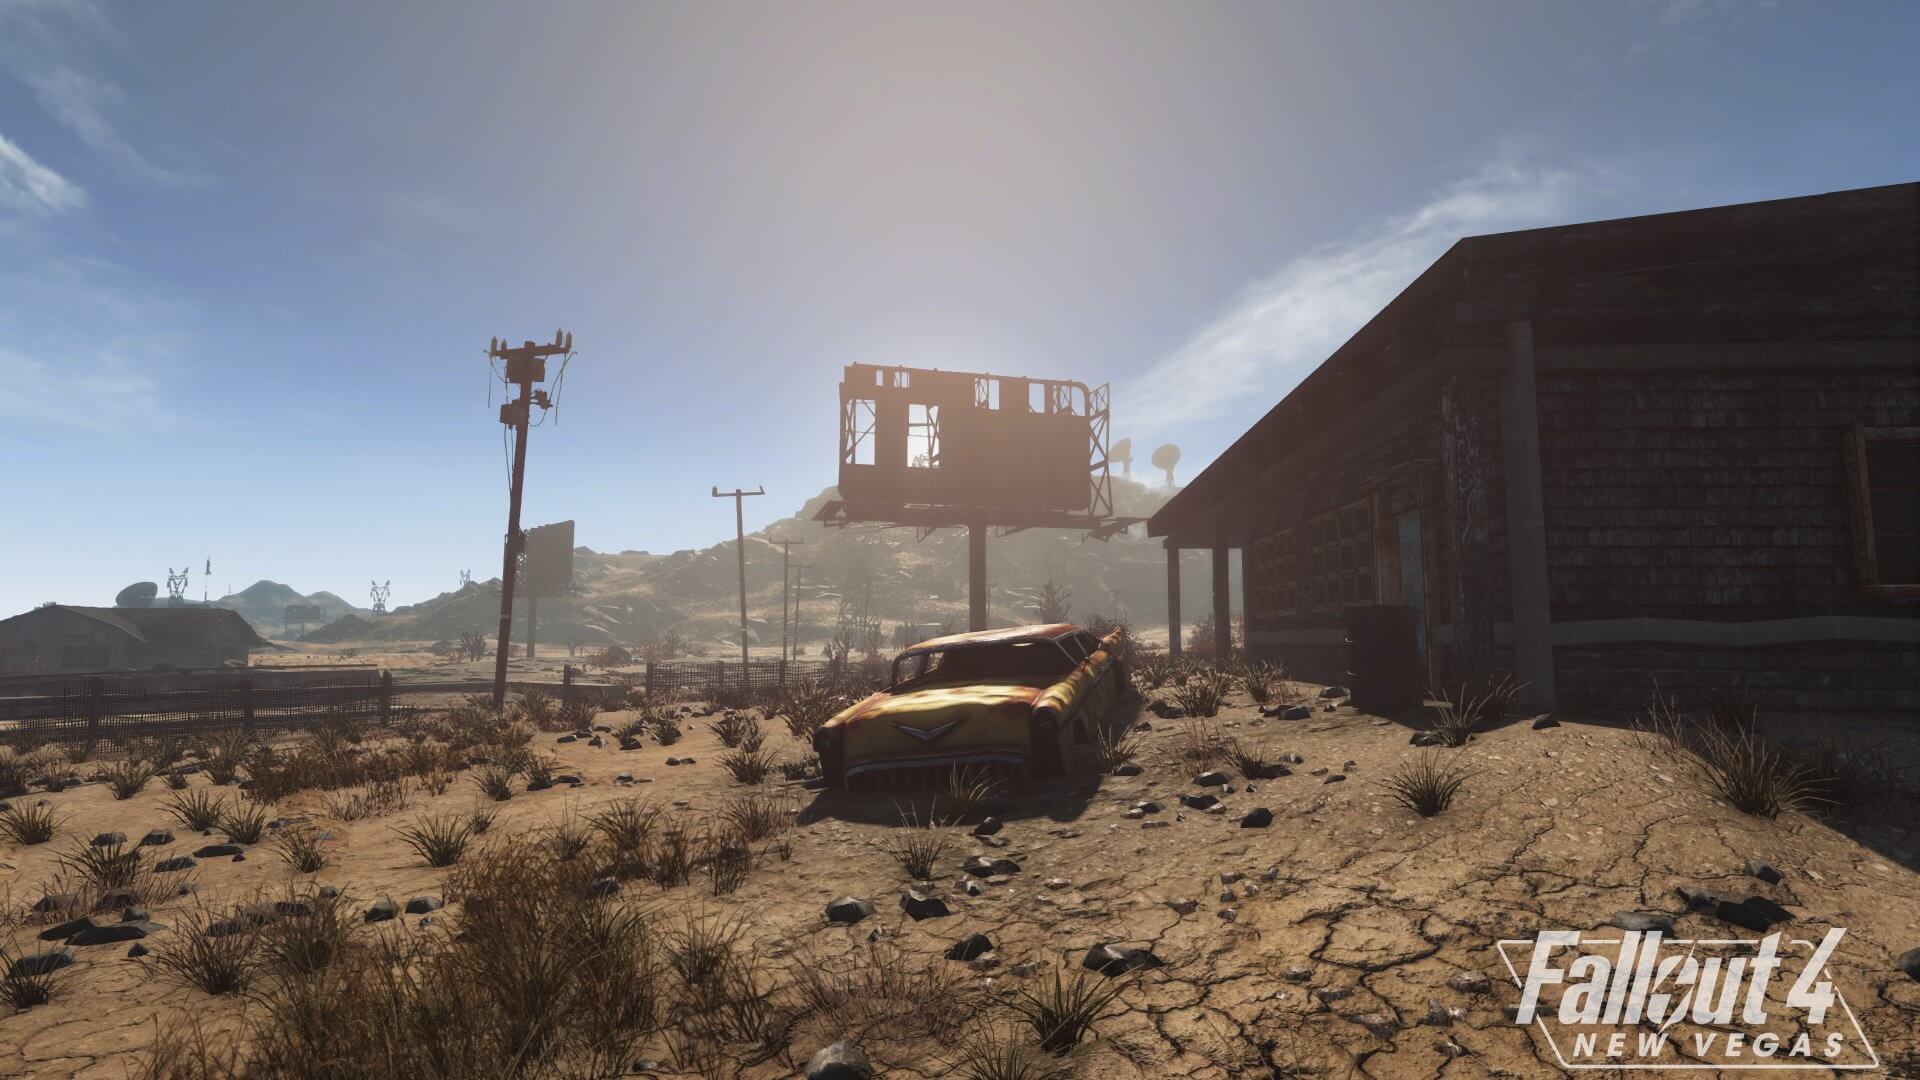 New Screenshots Released For The Fallout New Vegas Remake In Fallout 4 Engine Fallout 4 New Vegas